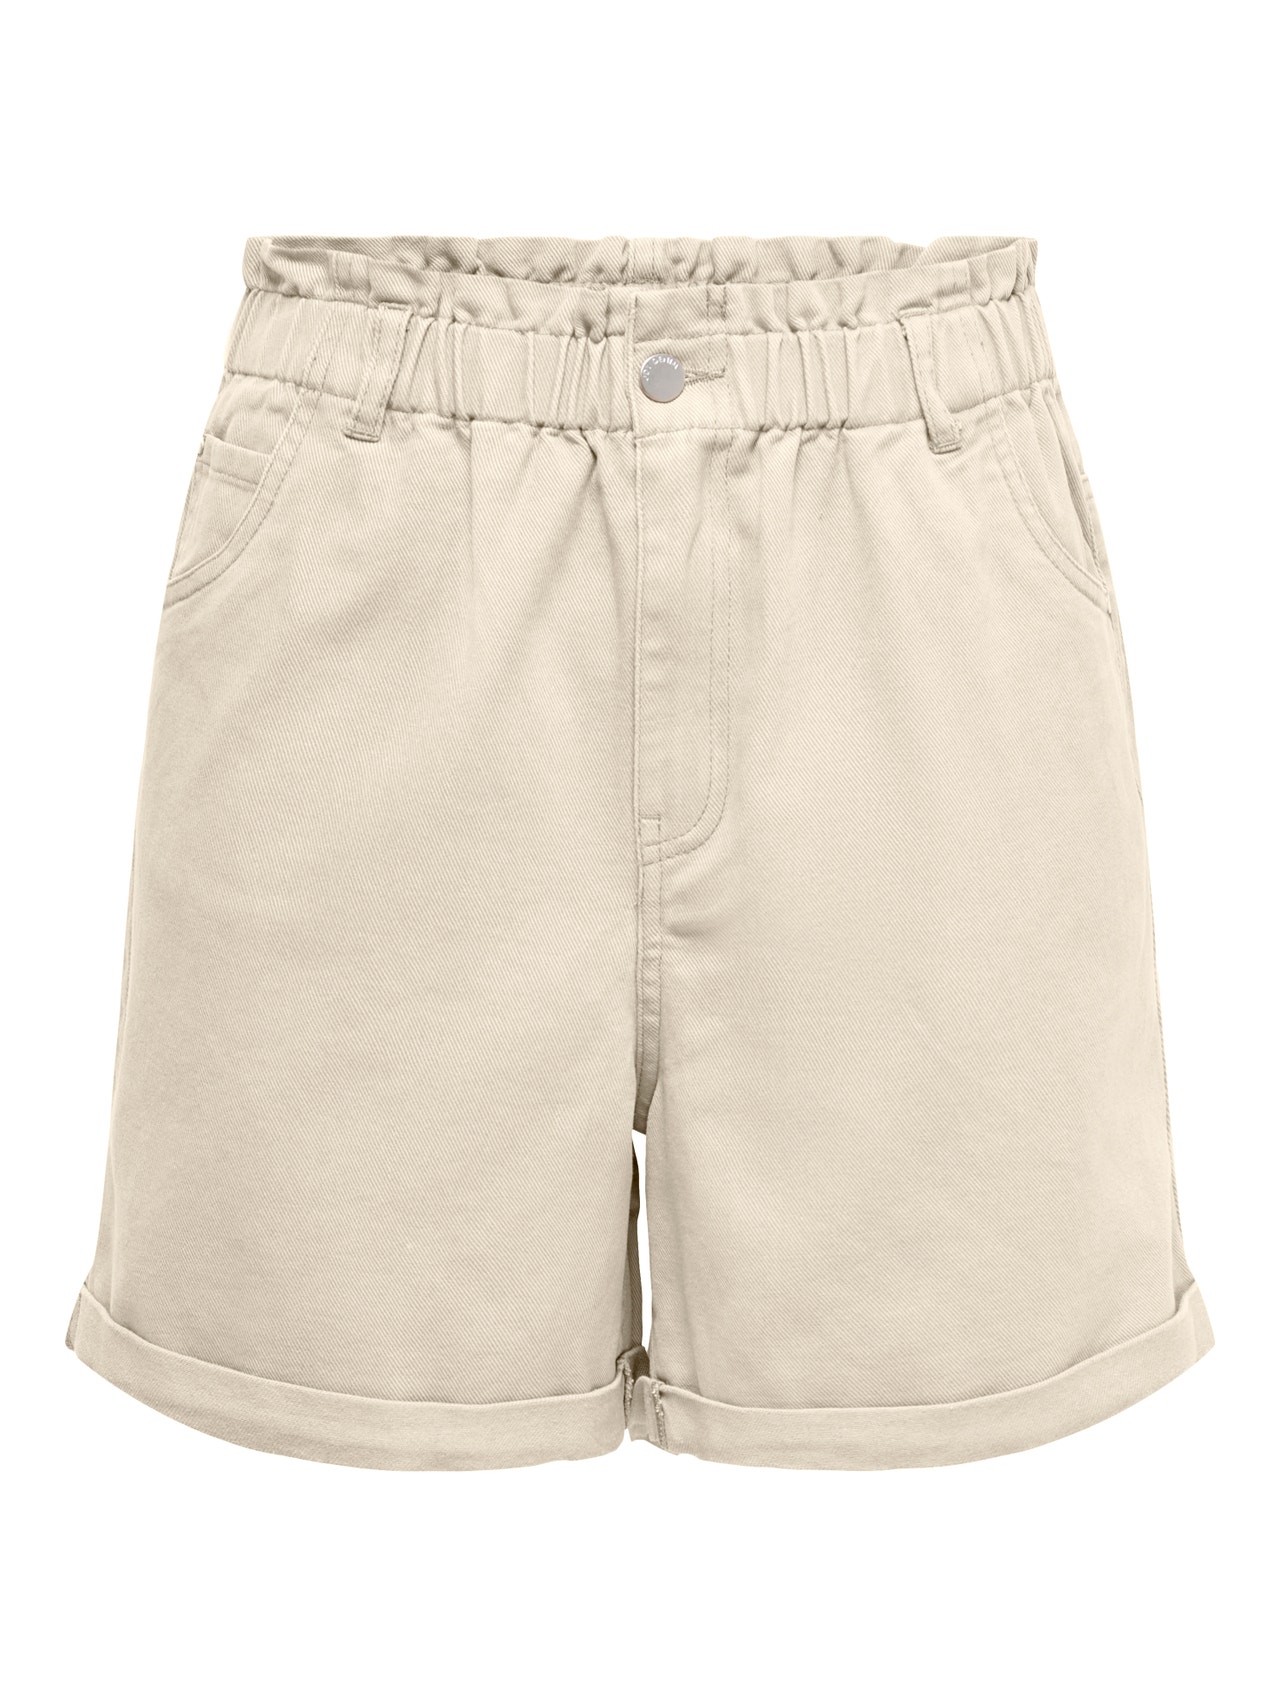 ONLY Loose Fit High waist Fold-up hems Shorts -Sandshell - 15257540